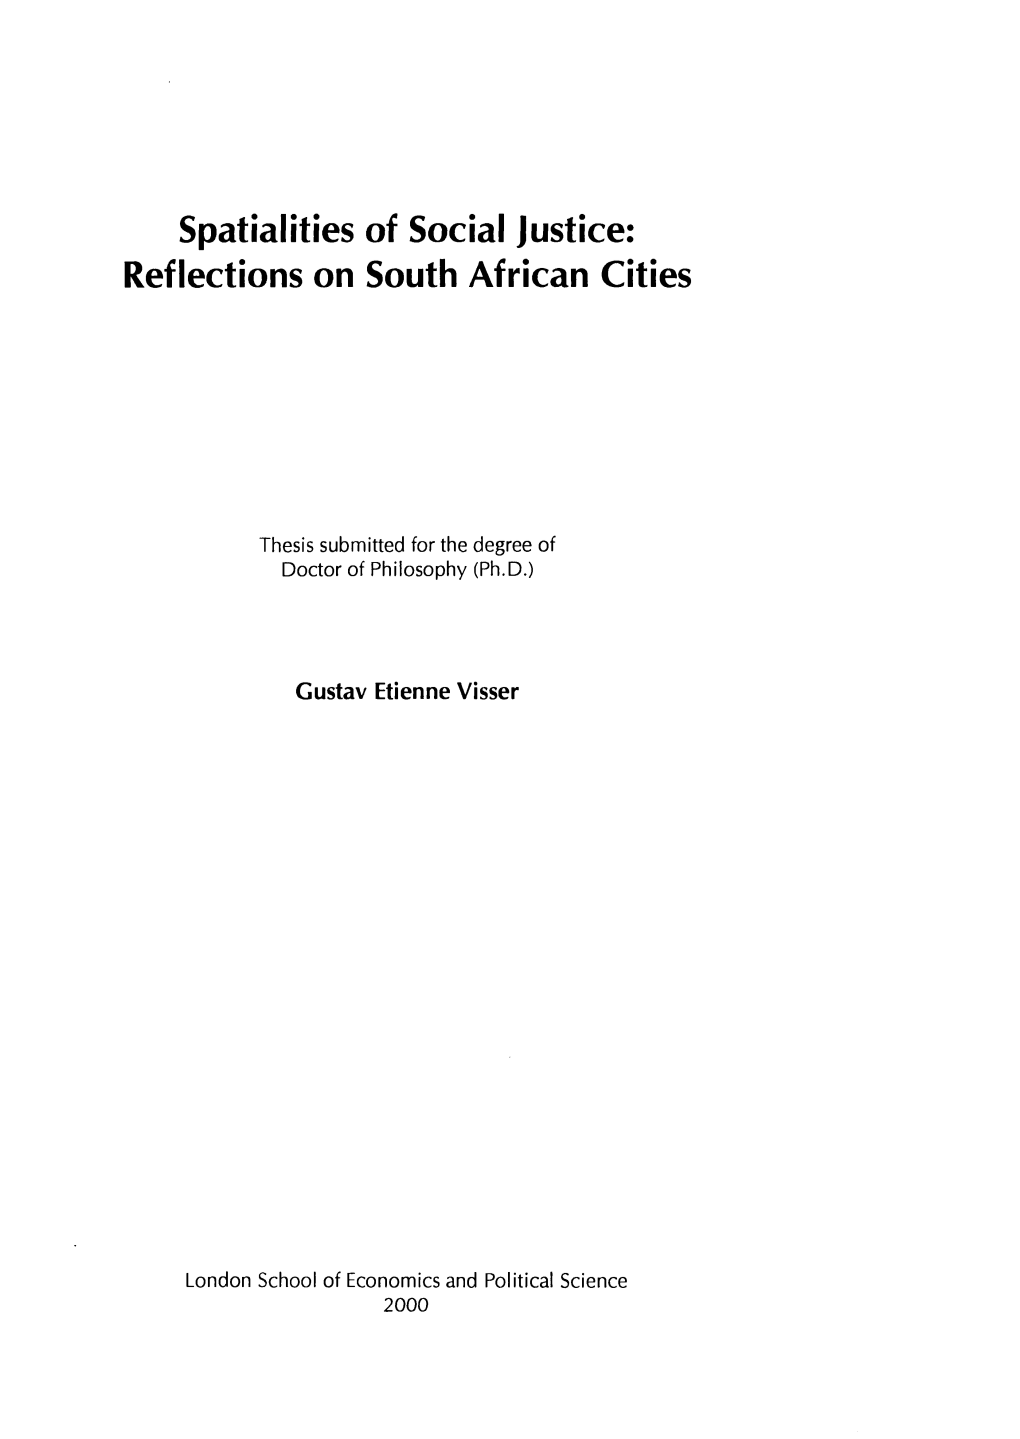 Spatialities of Social Justice: Reflections on South African Cities